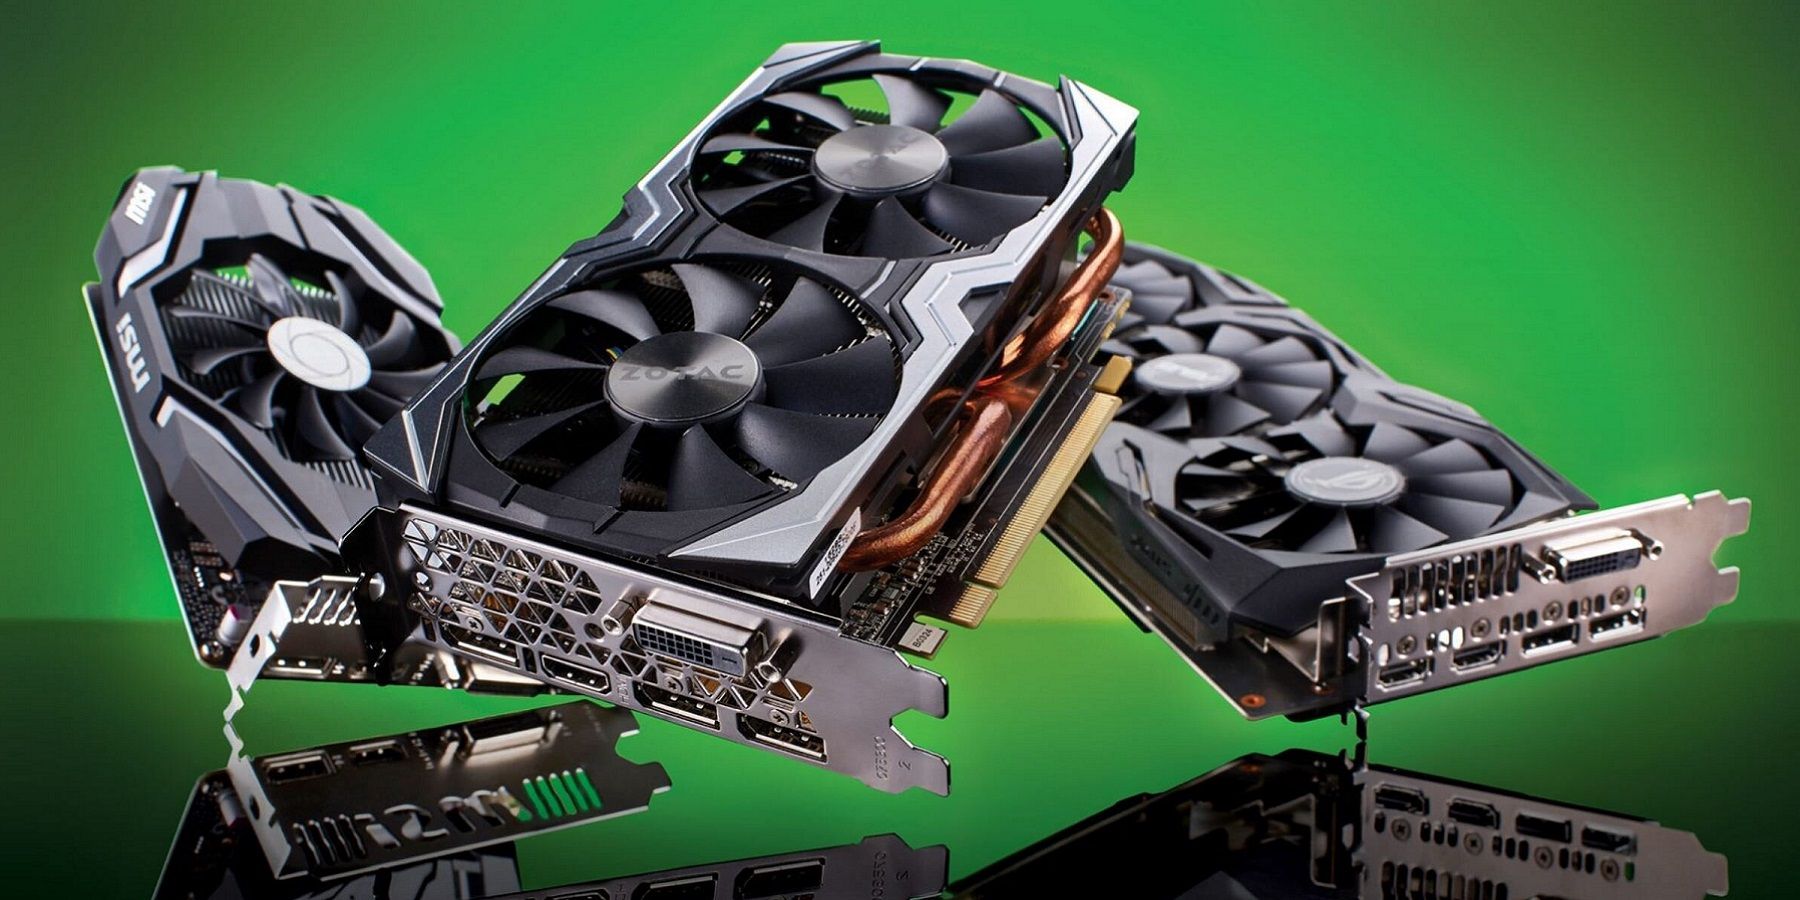 An image showing some floating AMD and Nvidia graphics cards on a green background.